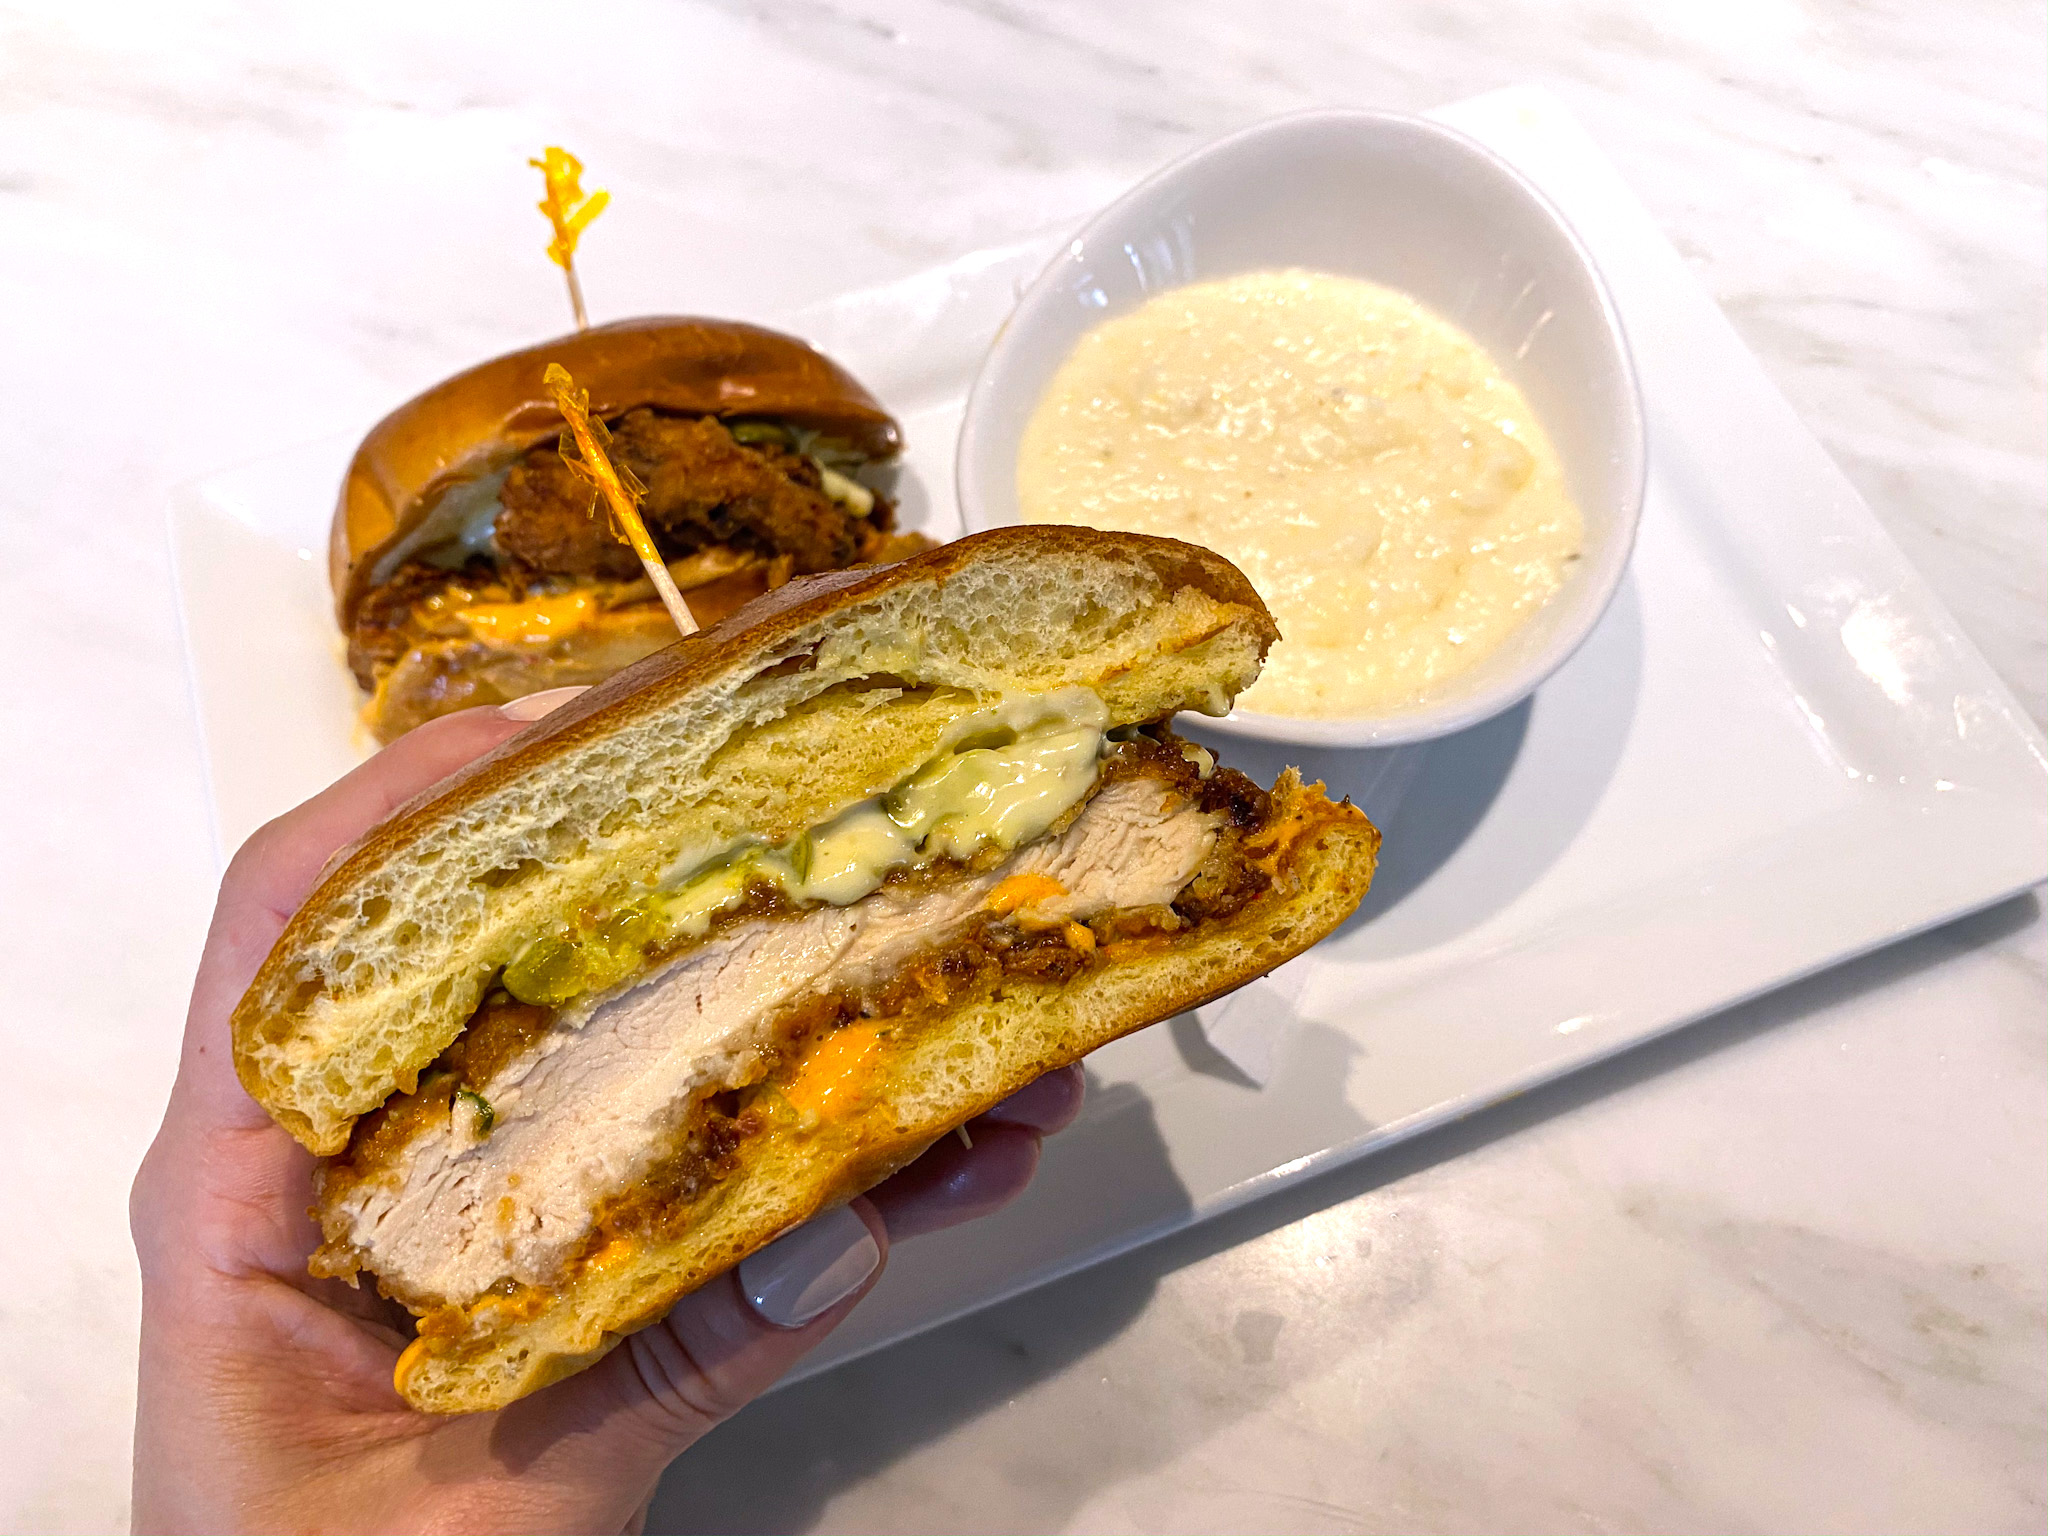 The Chicken Sandwich with Grits at The Dewey